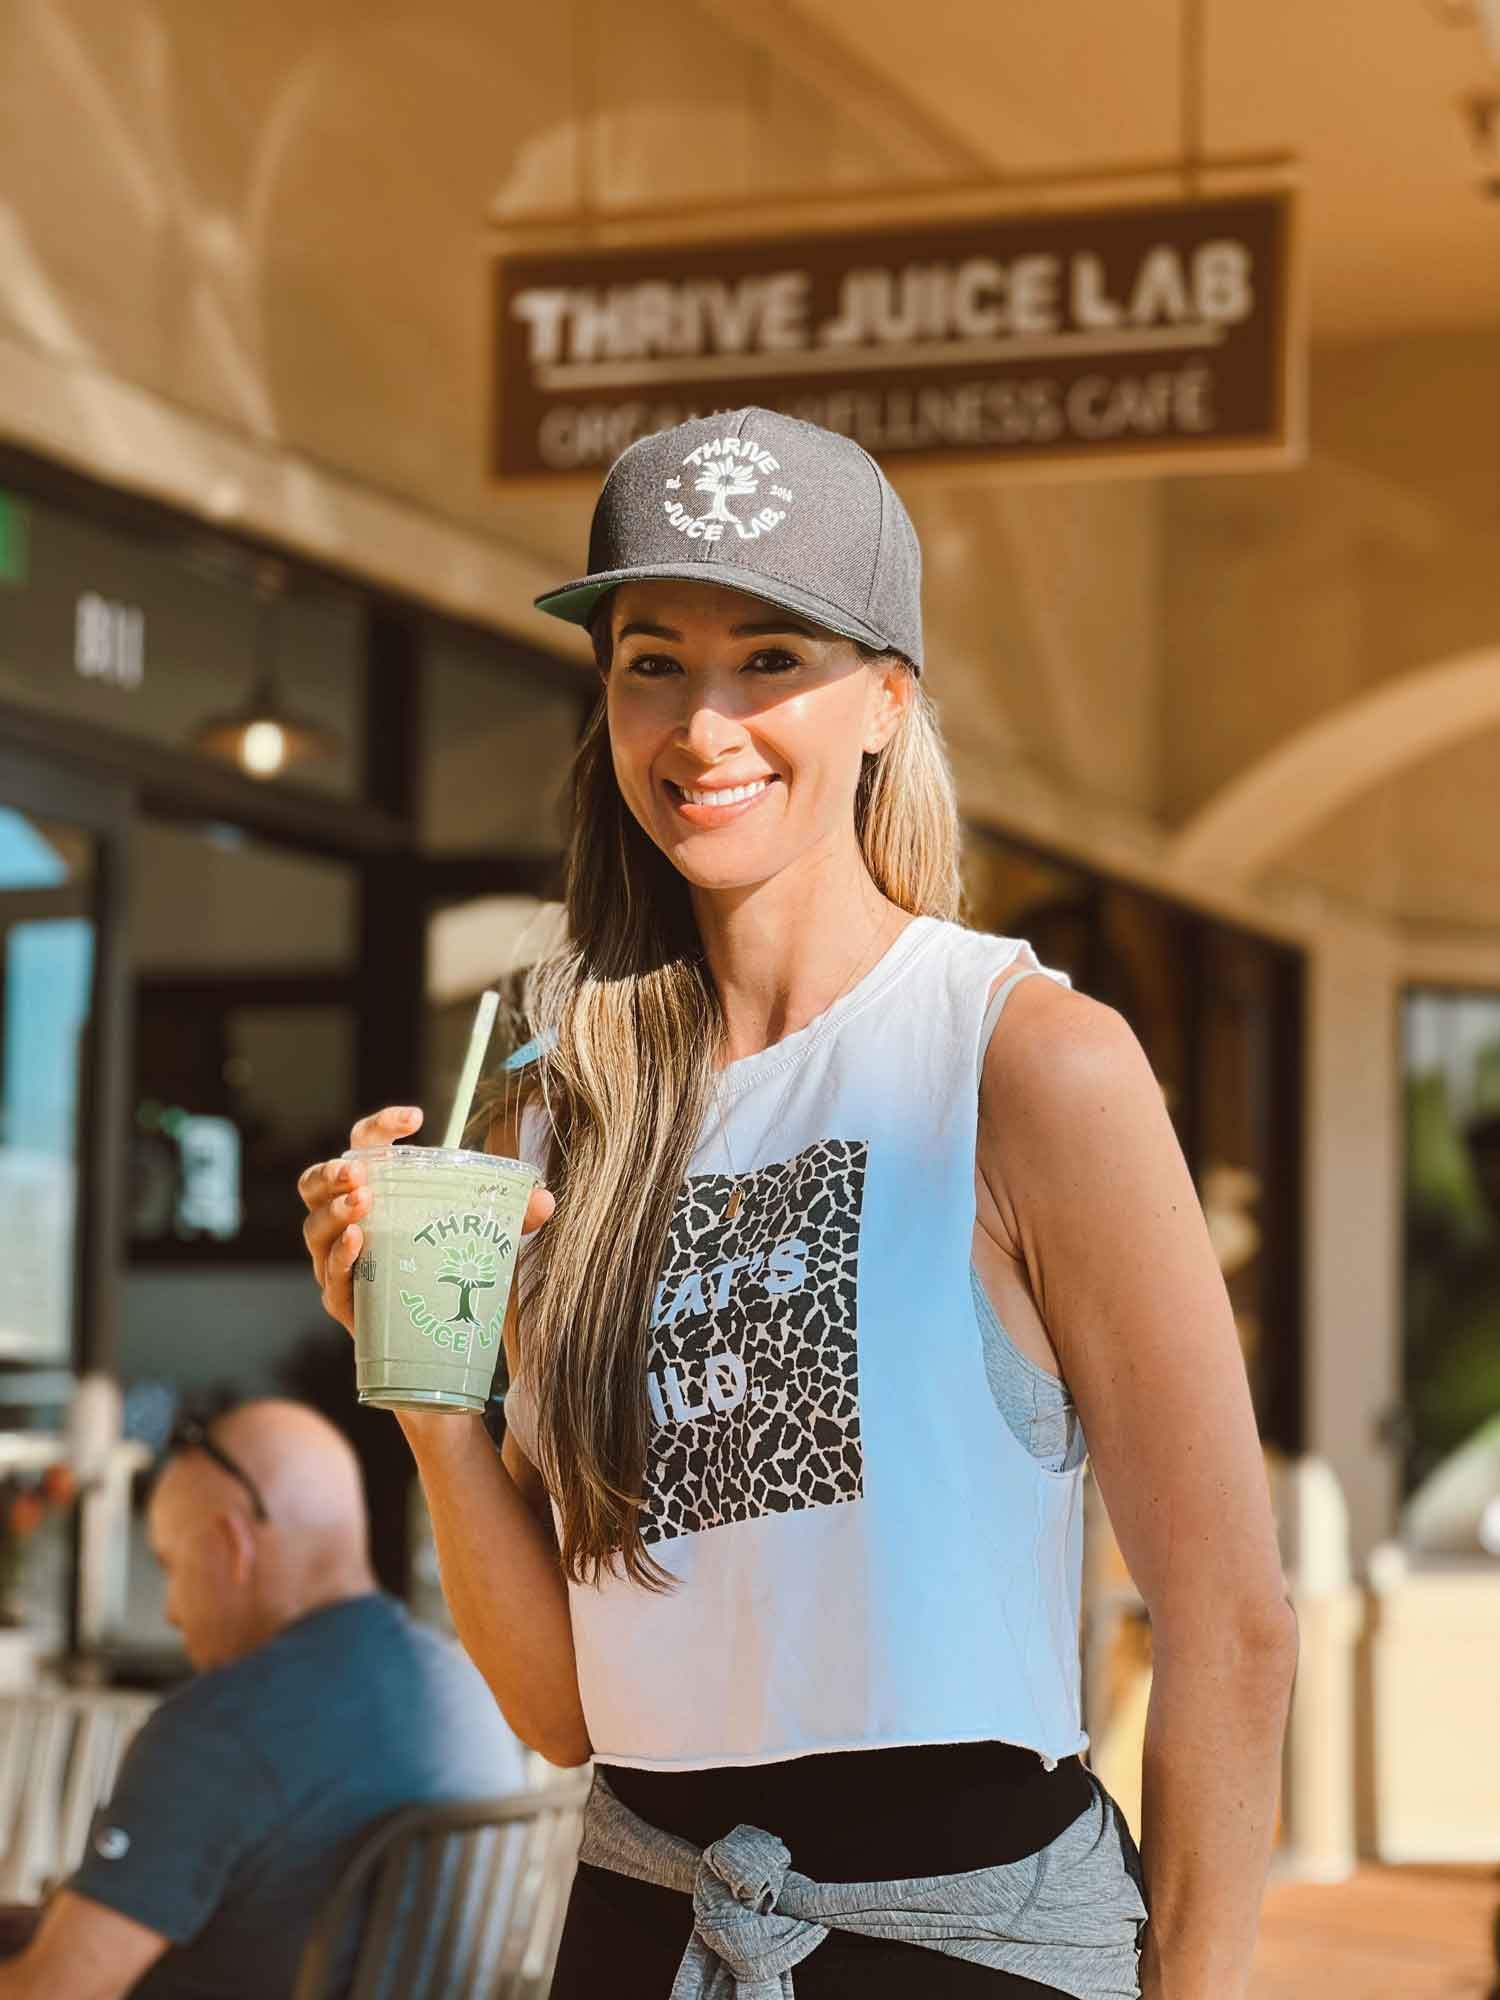 Smiling Thrive Juice Lab customer with smoothie